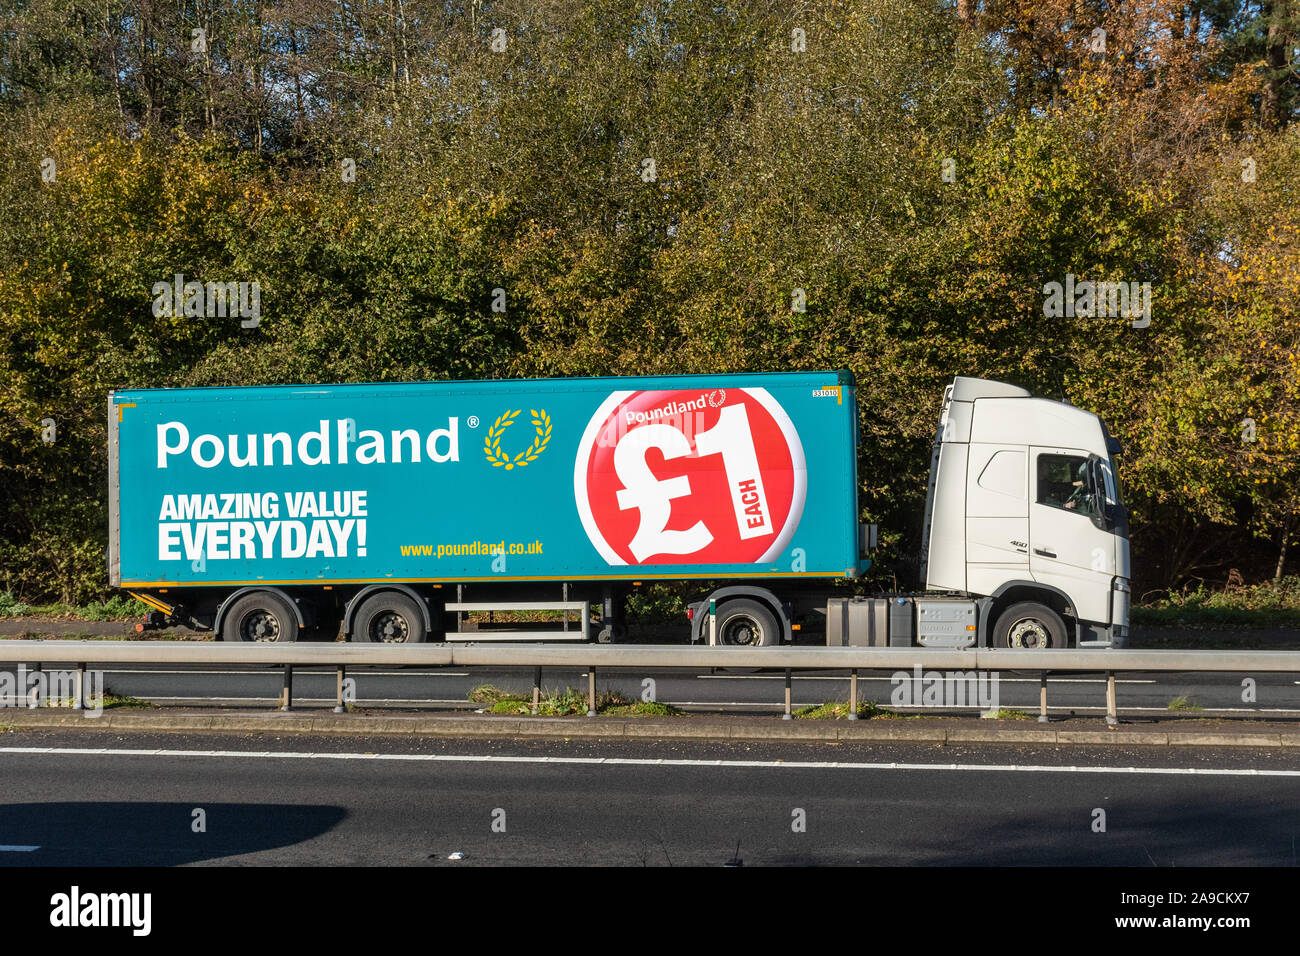 Poundland lorry or truck driving along a dual carriageway, UK Stock Photo